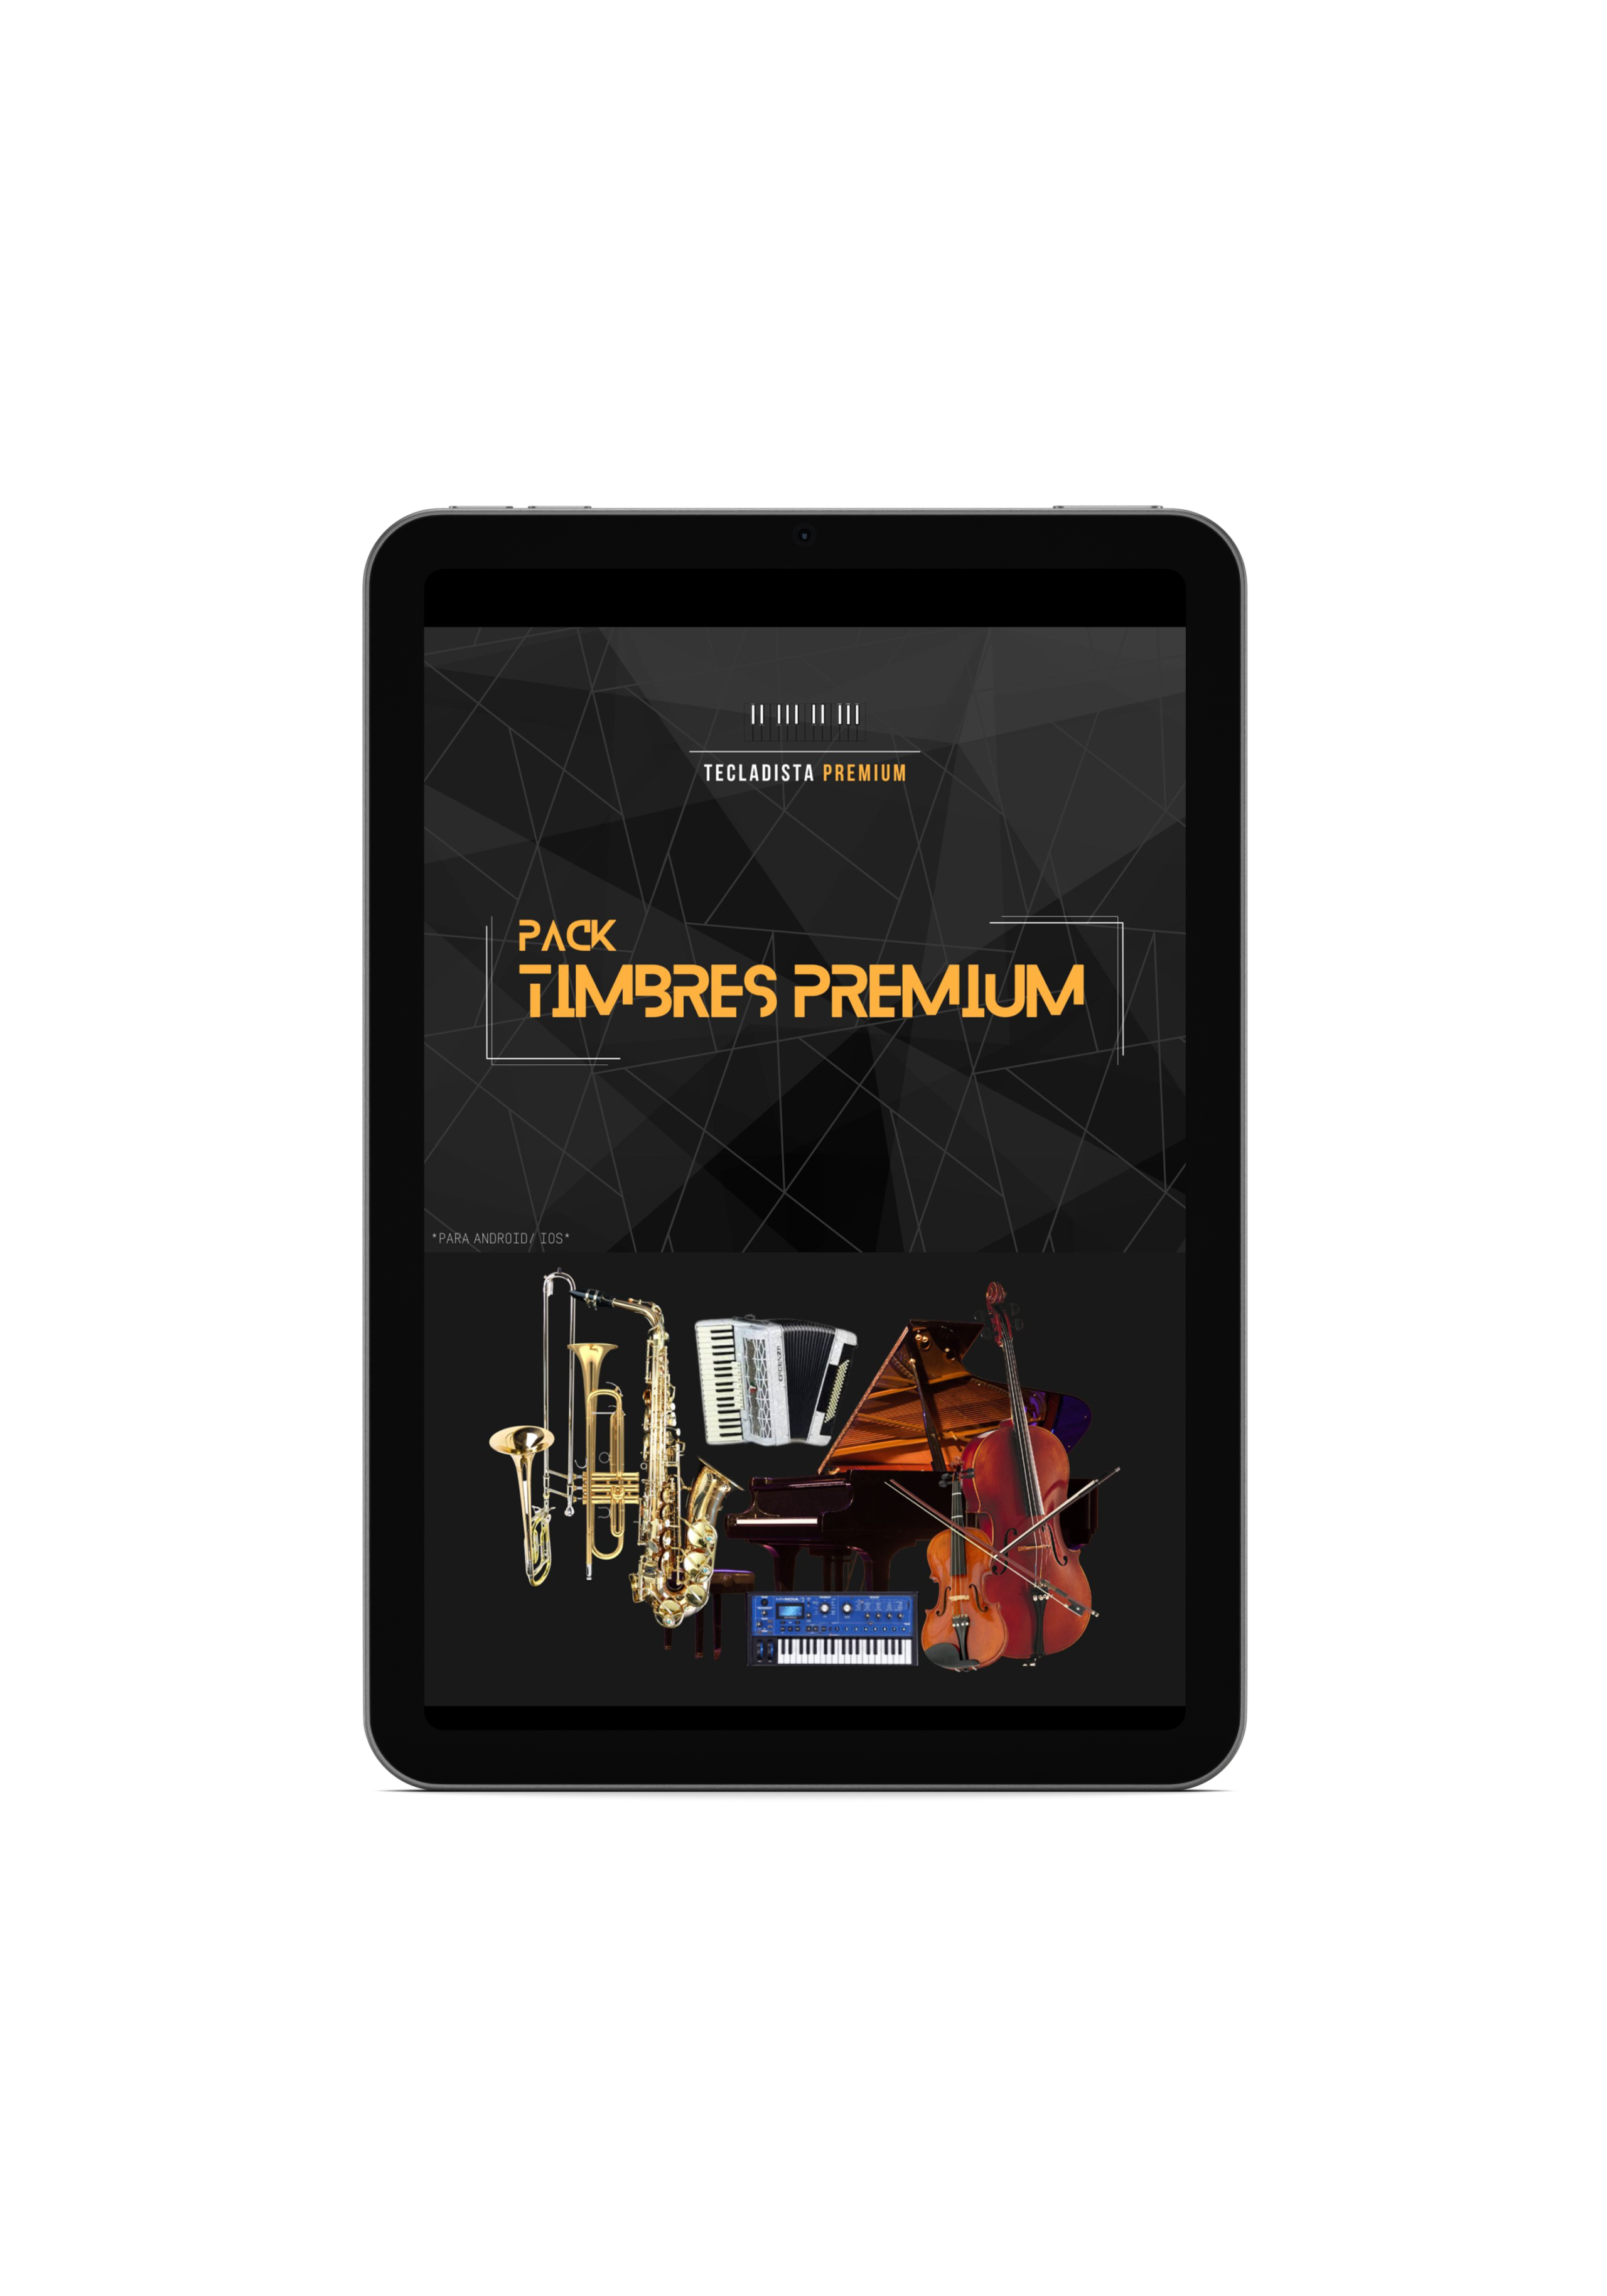 iPad-Mini-in-4-colors_Page-2_2-from-TIMBRES-PREMIUM.png